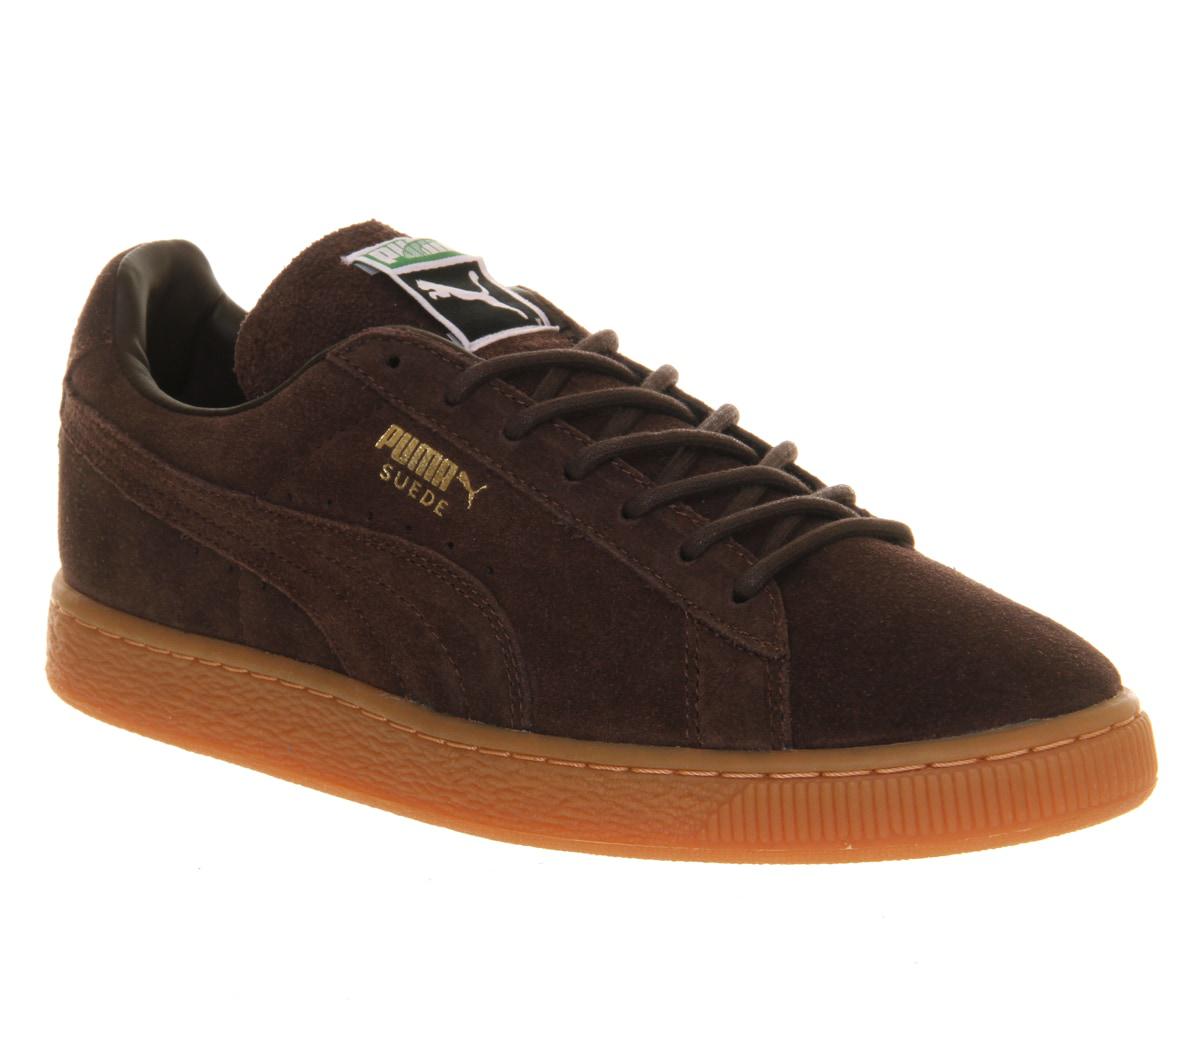 PUMA Suede Classic in Chocolate (Brown) for Men - Lyst